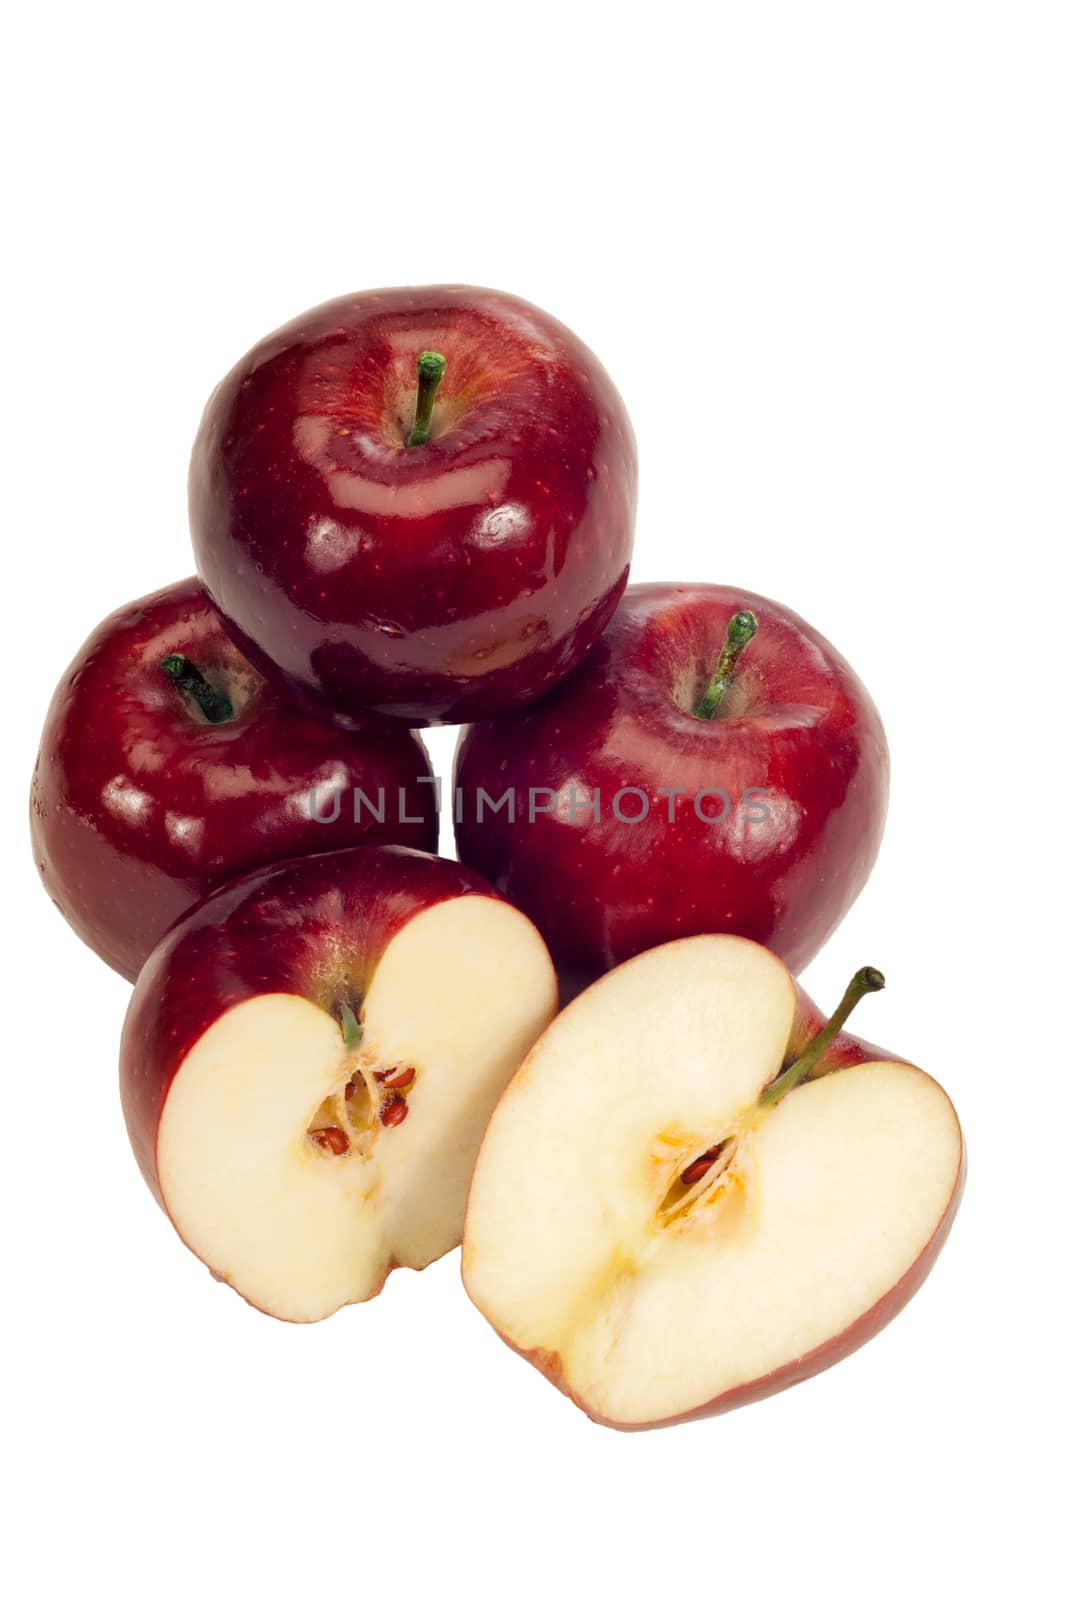 Yummy red delicious apples both whole and sliced on white background. Lots of copy space around.